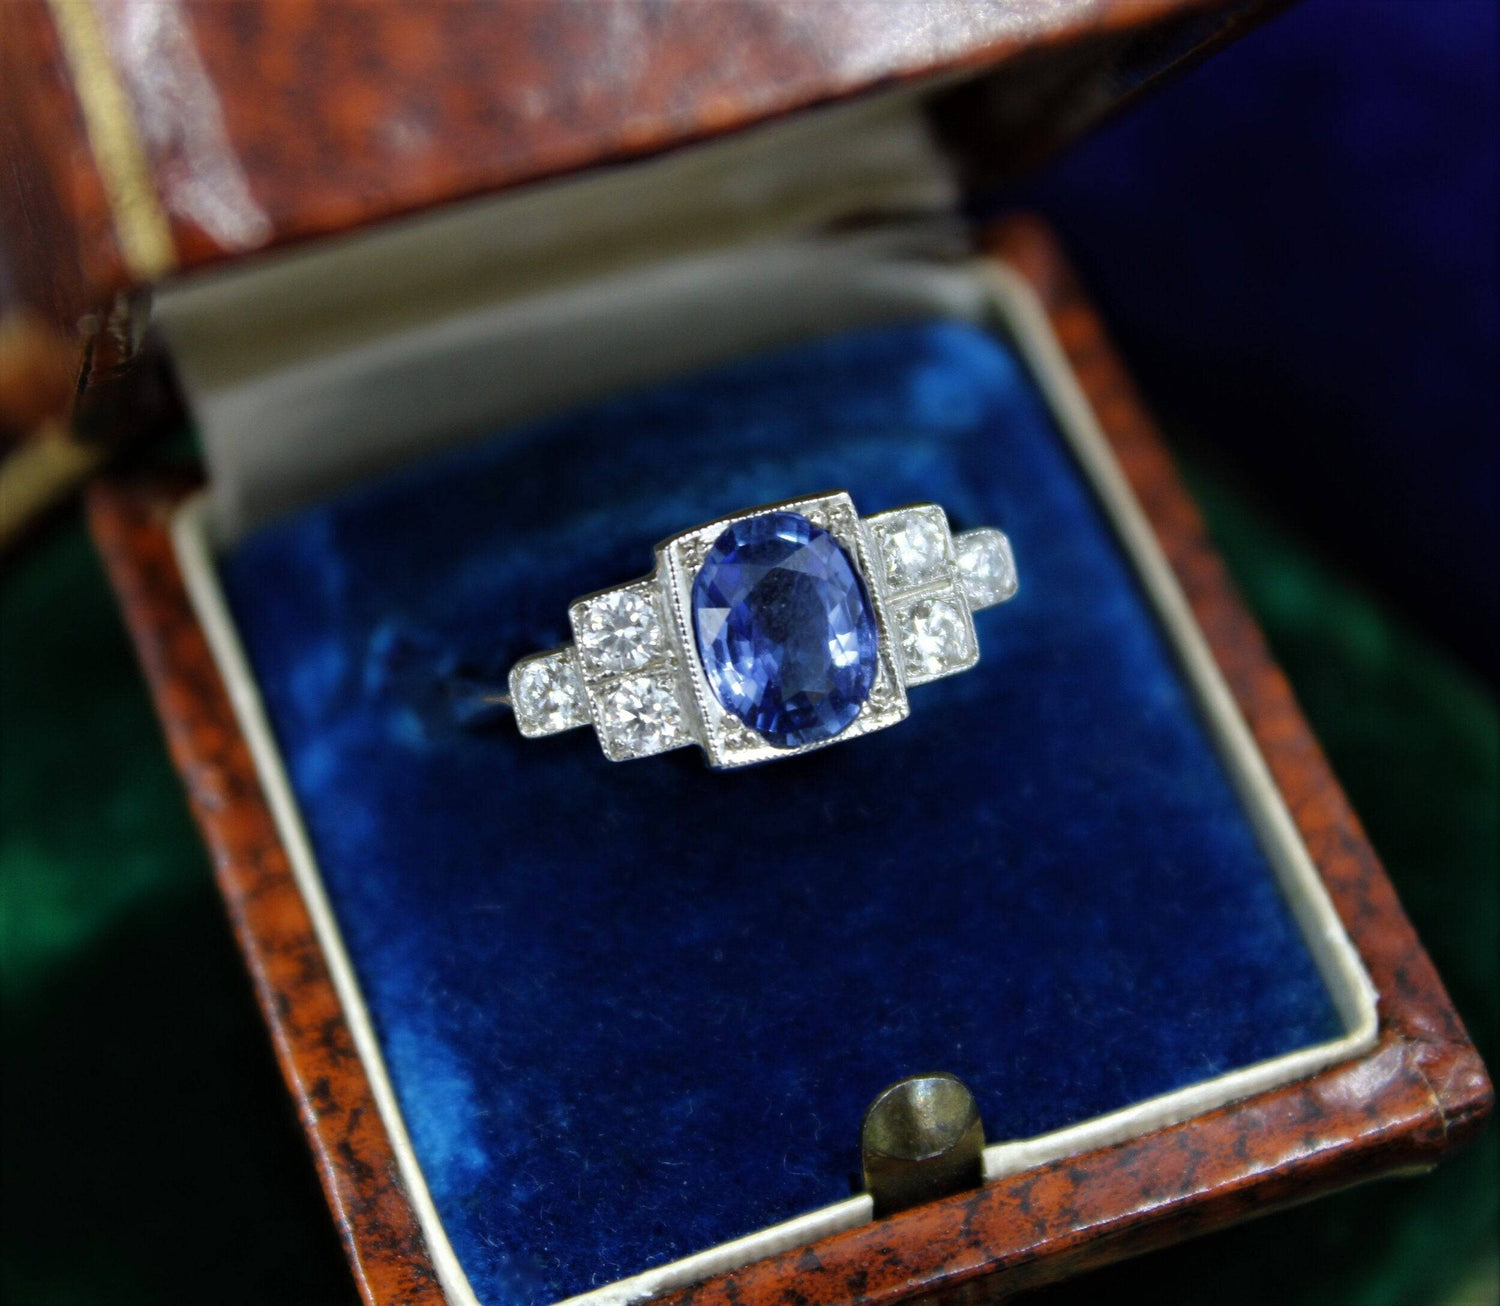 A very fine Art Deco Style Sapphire and Diamond Ring mounted in Platinum, Mid - Late 20th Century - Robin Haydock Antiques